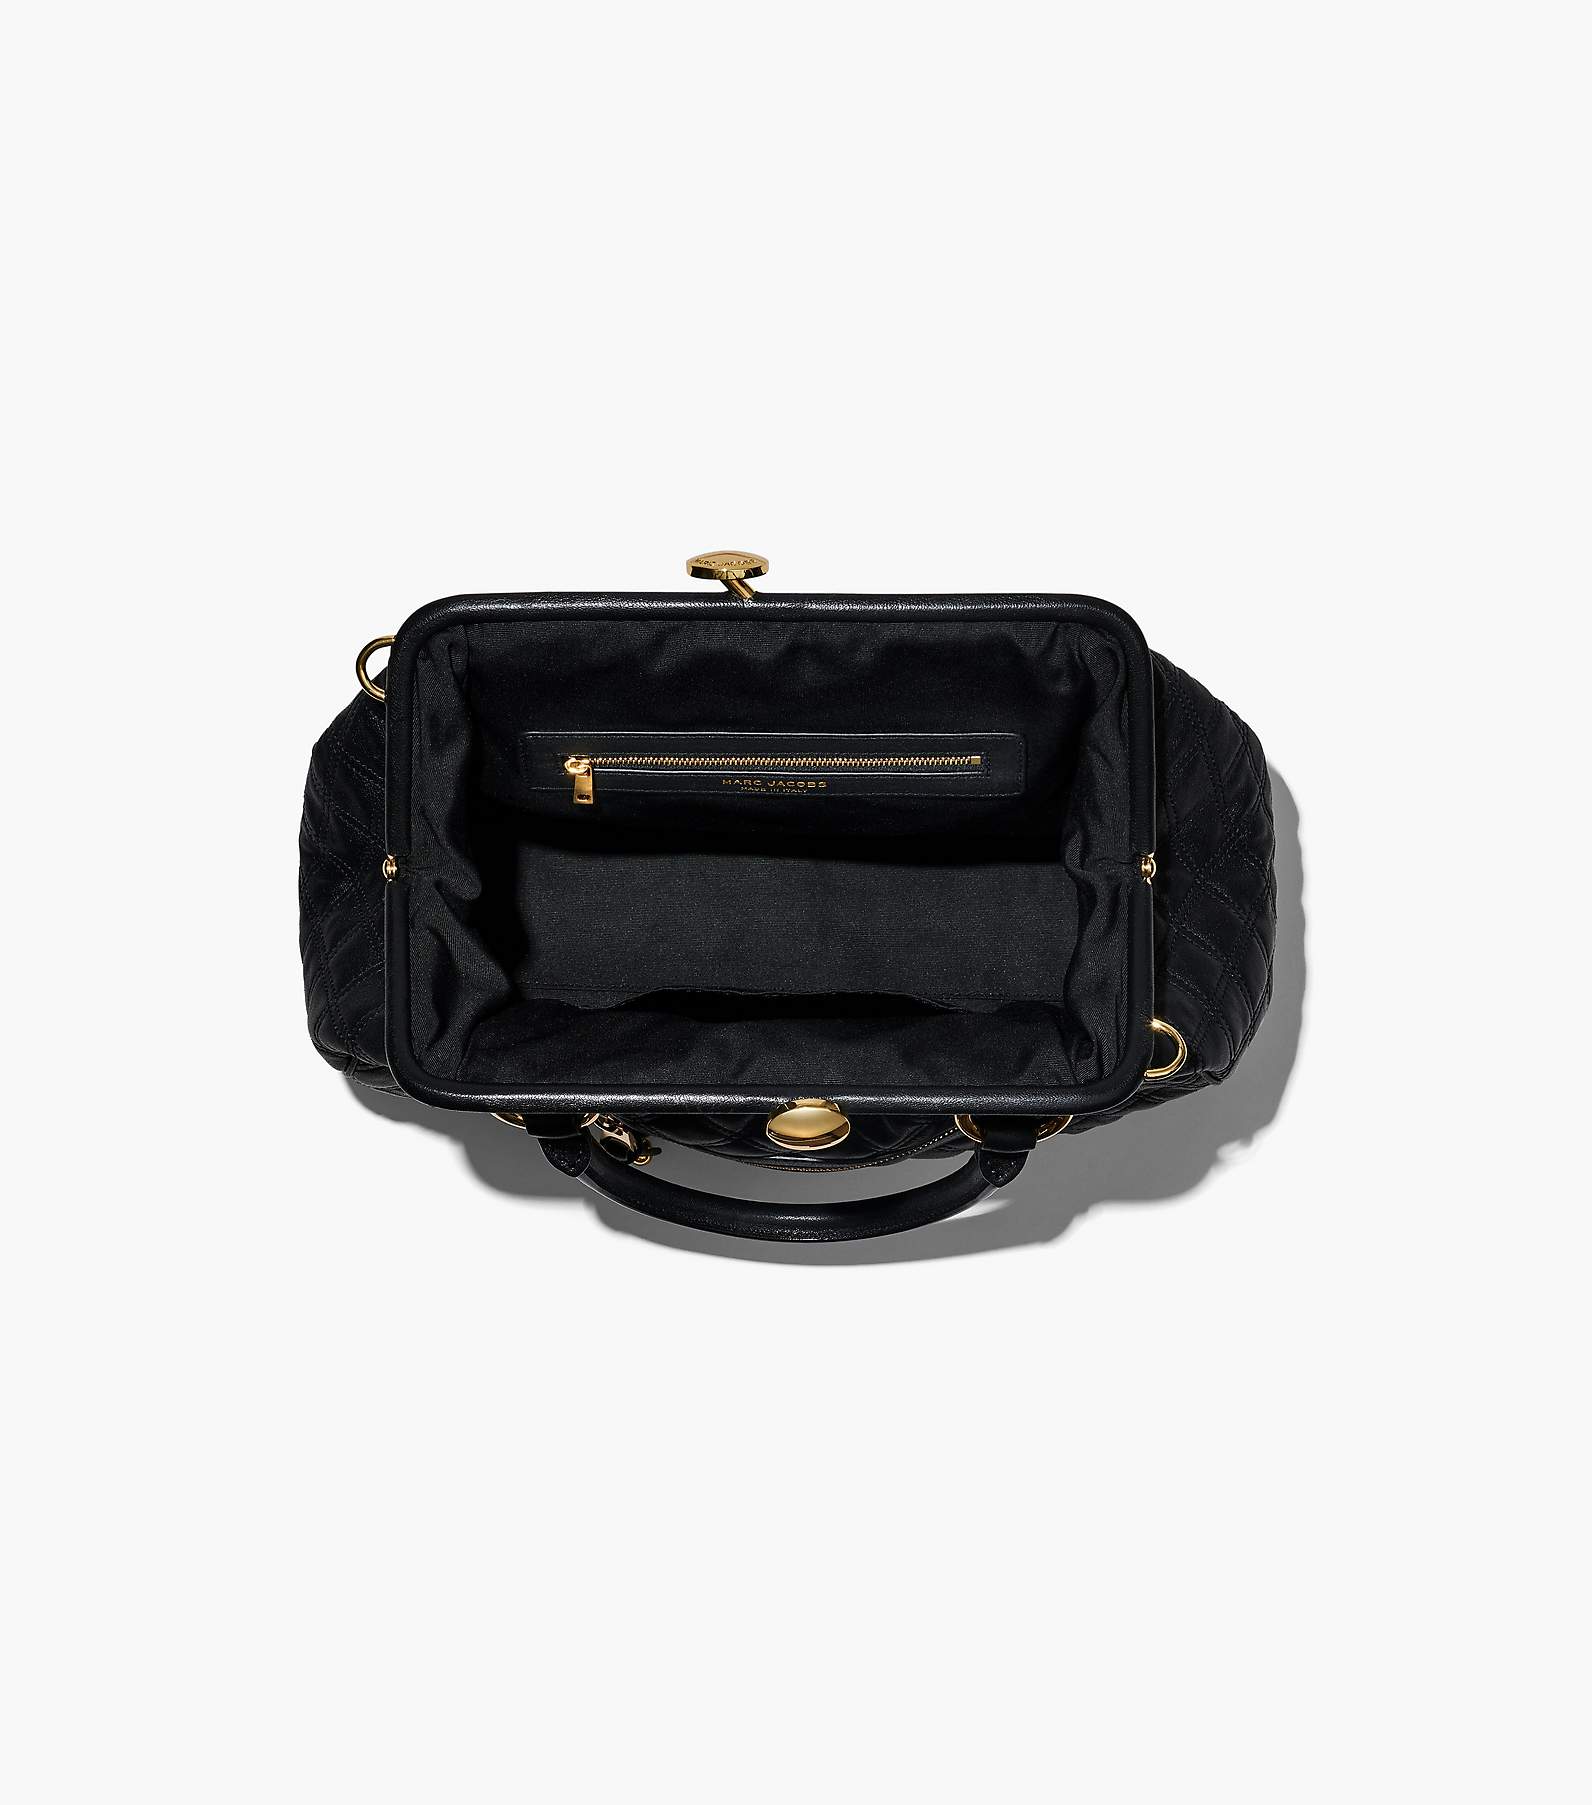 The Marc Jacobs Stam Bag Is Back After a Decade